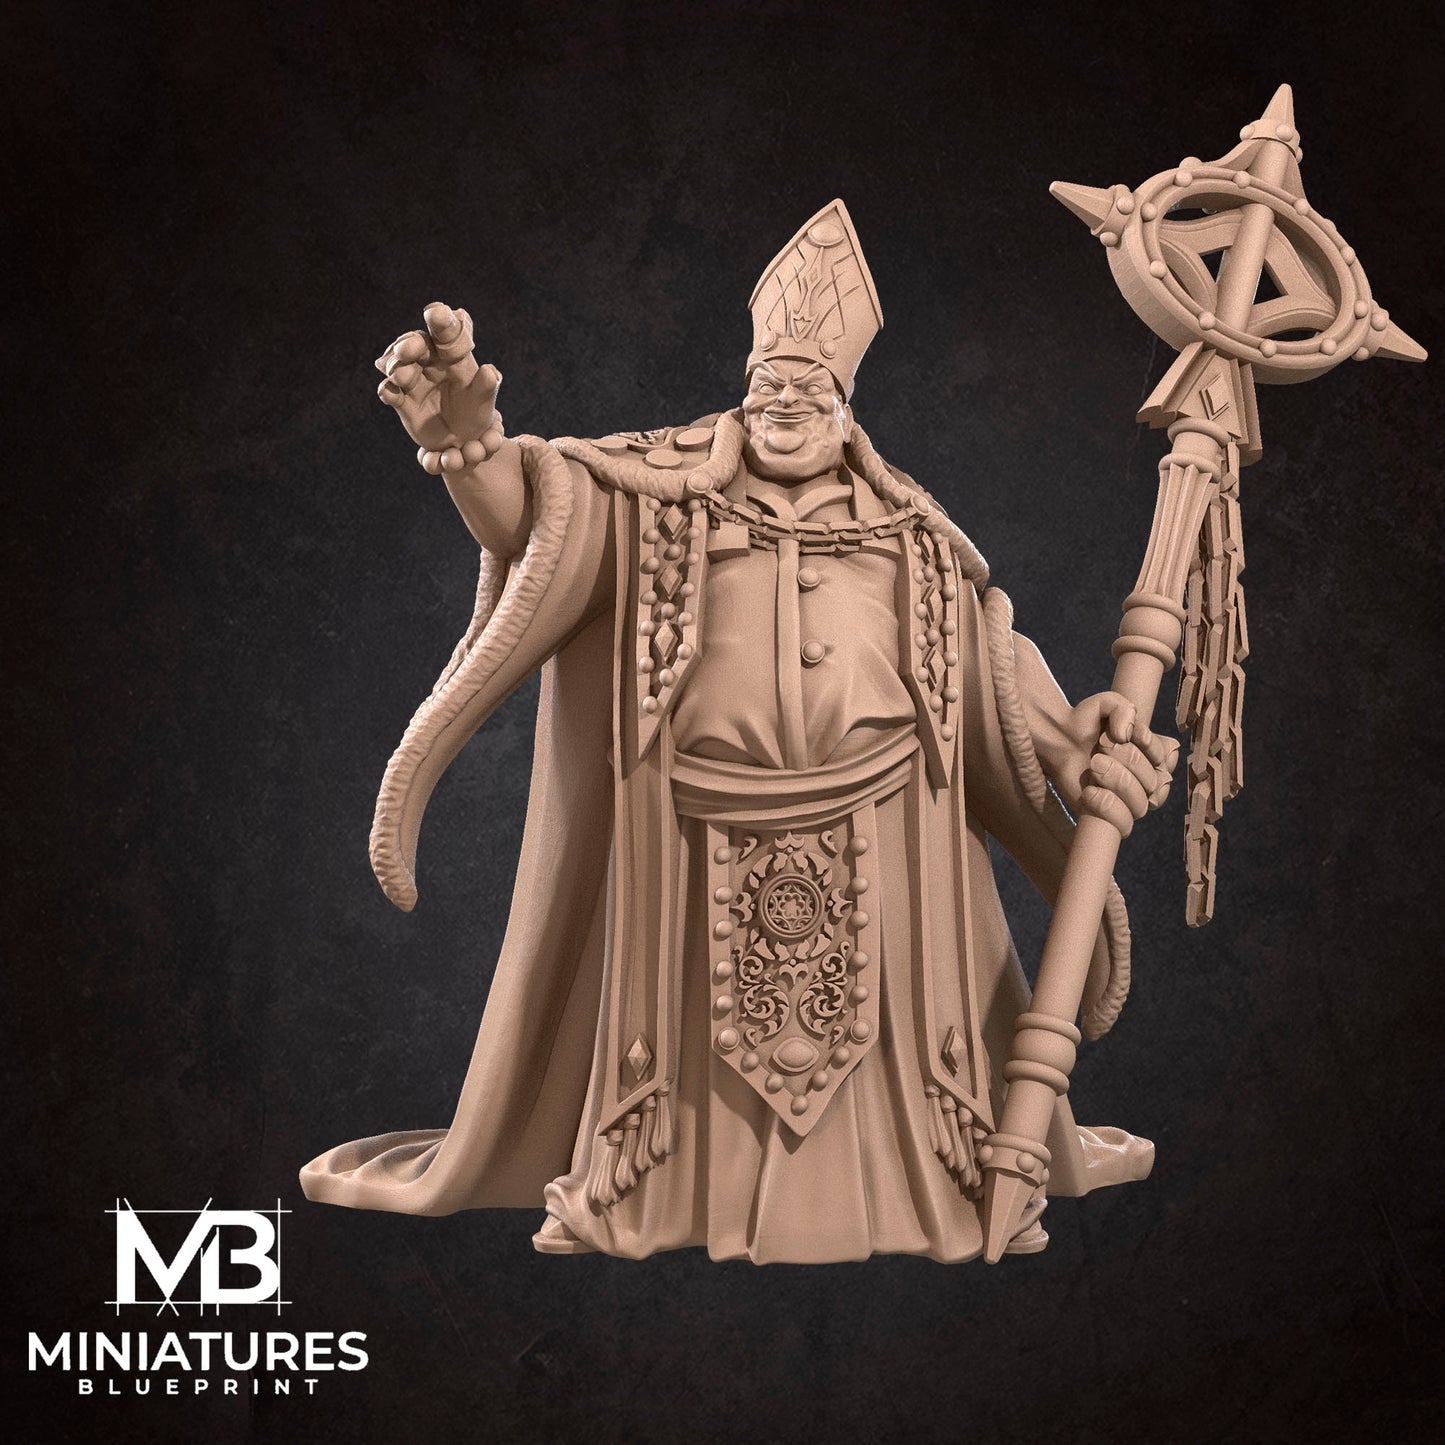 The Pope (Miniatures Blueprint Crossover)